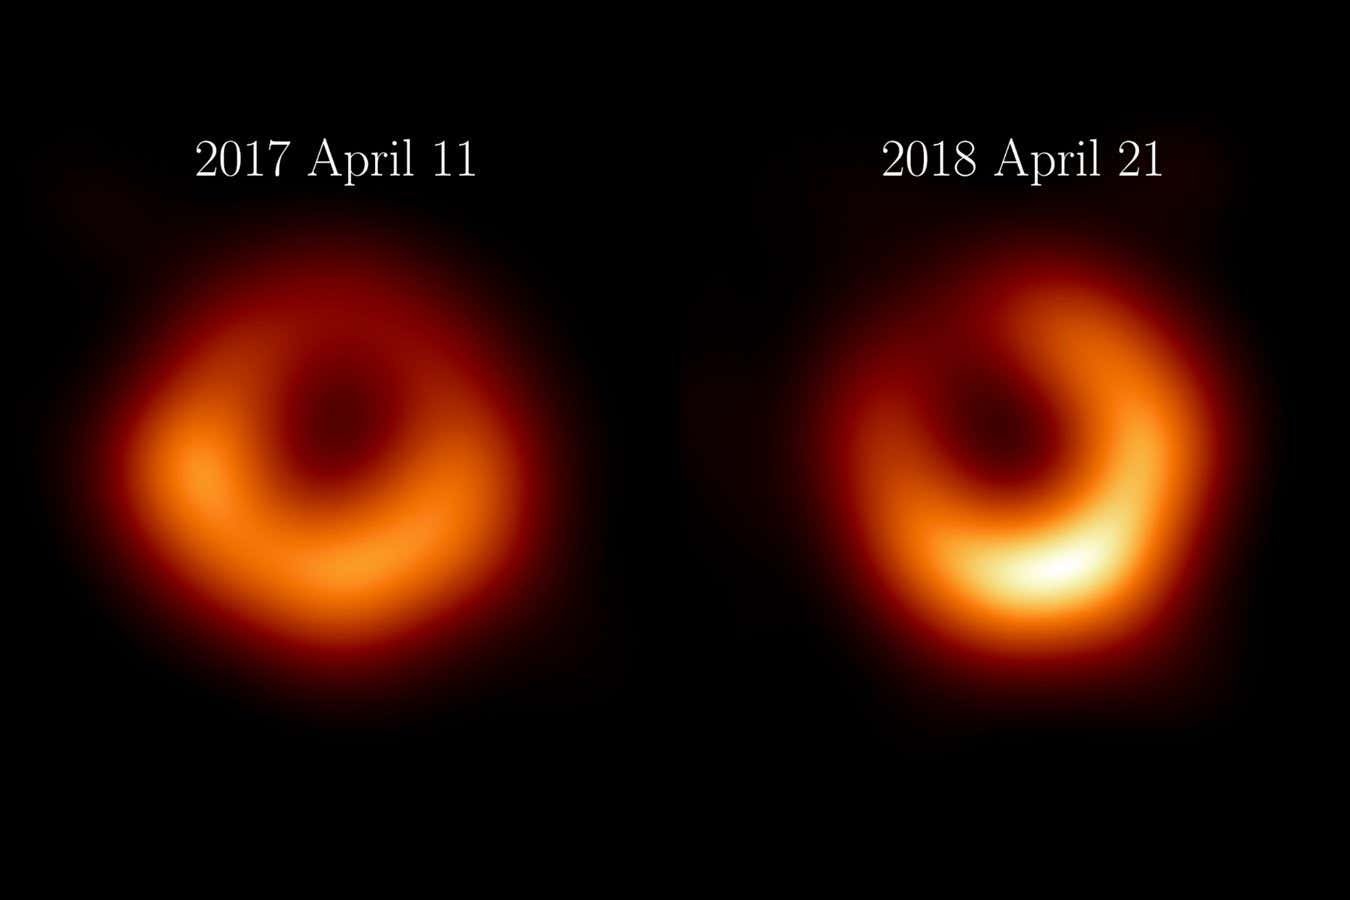 New fiery doughnut image is our most detailed glimpse of a black hole